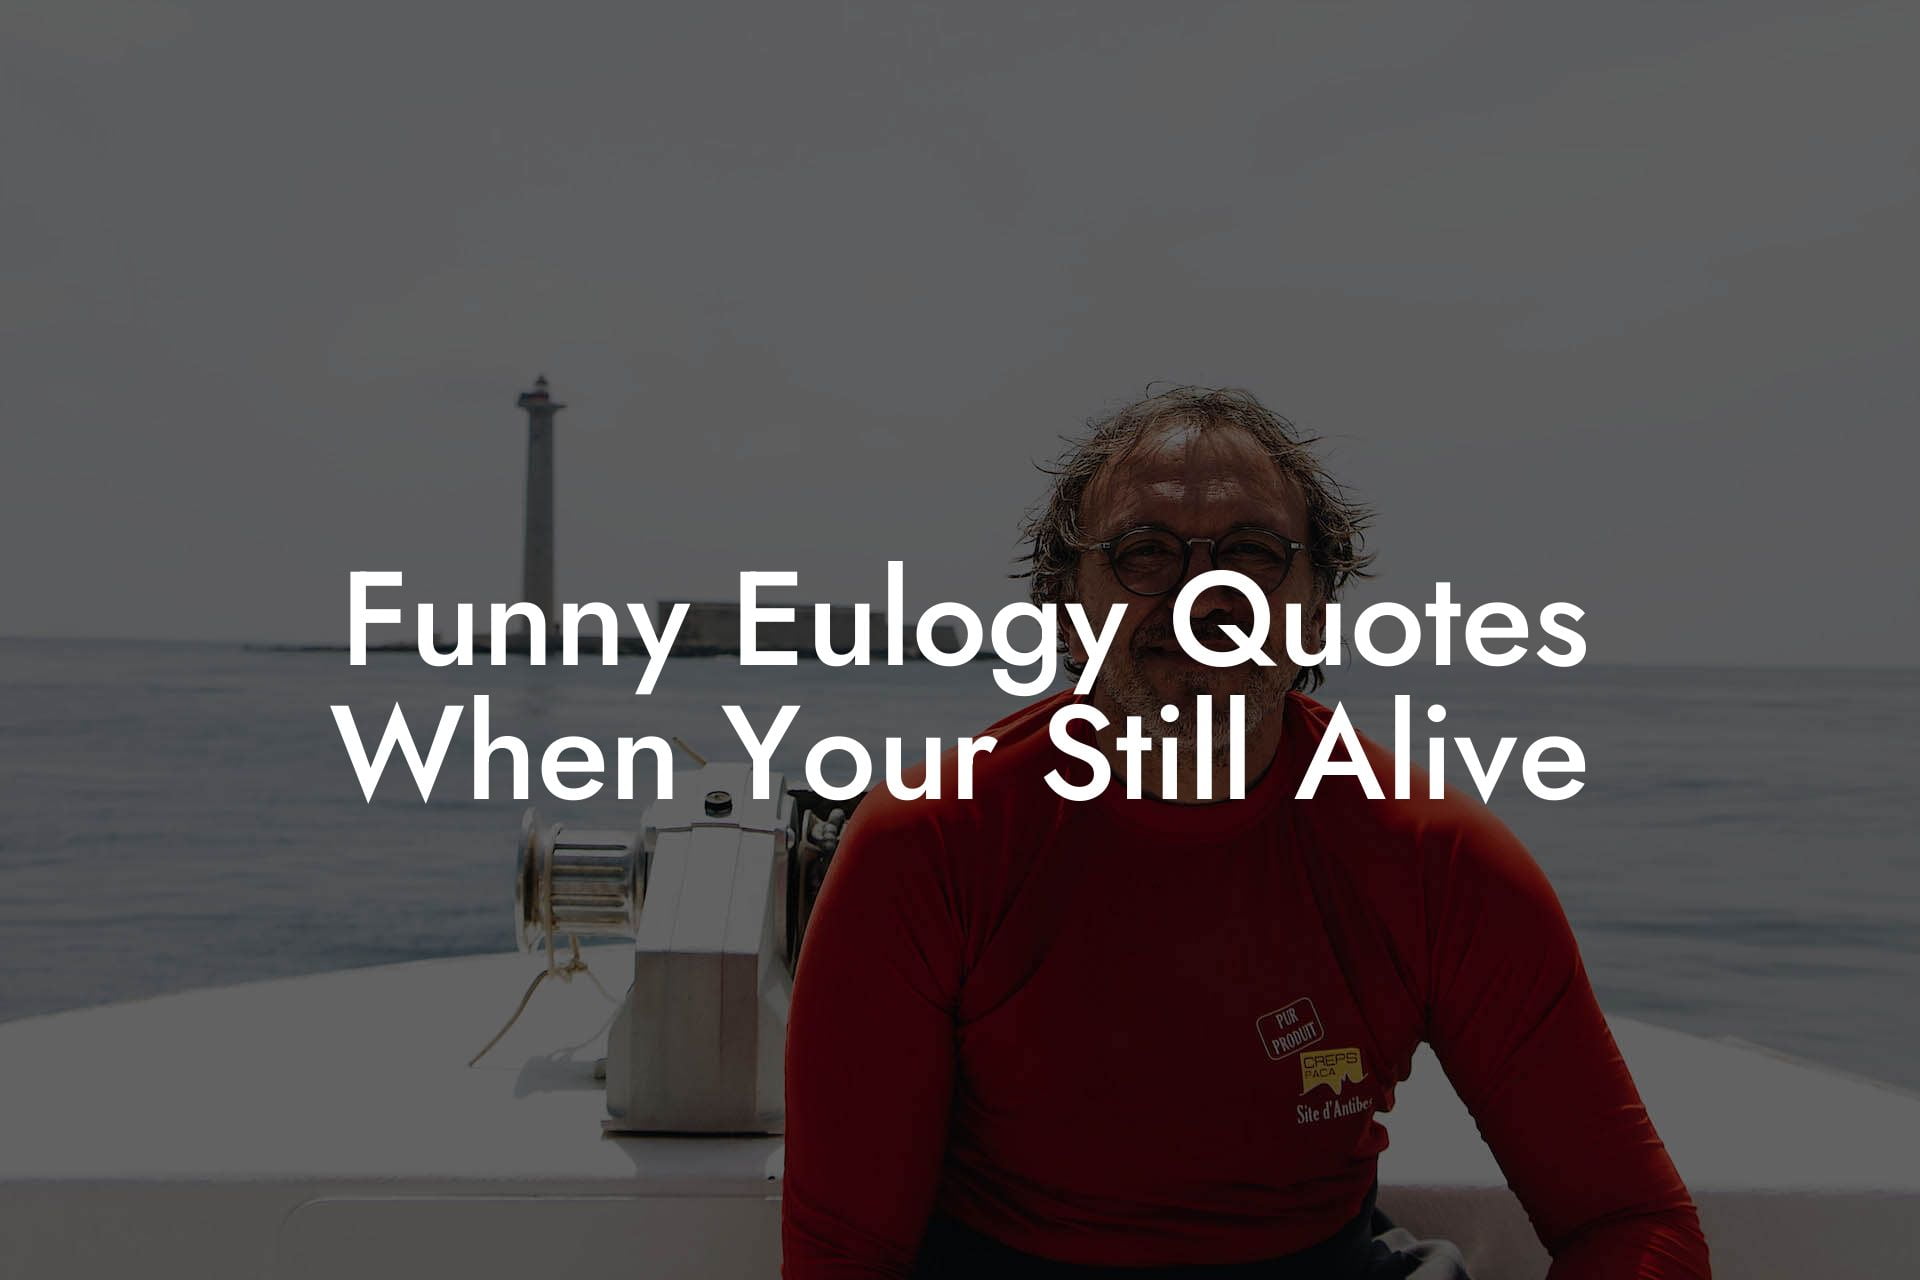 Funny Eulogy Quotes When Your Still Alive